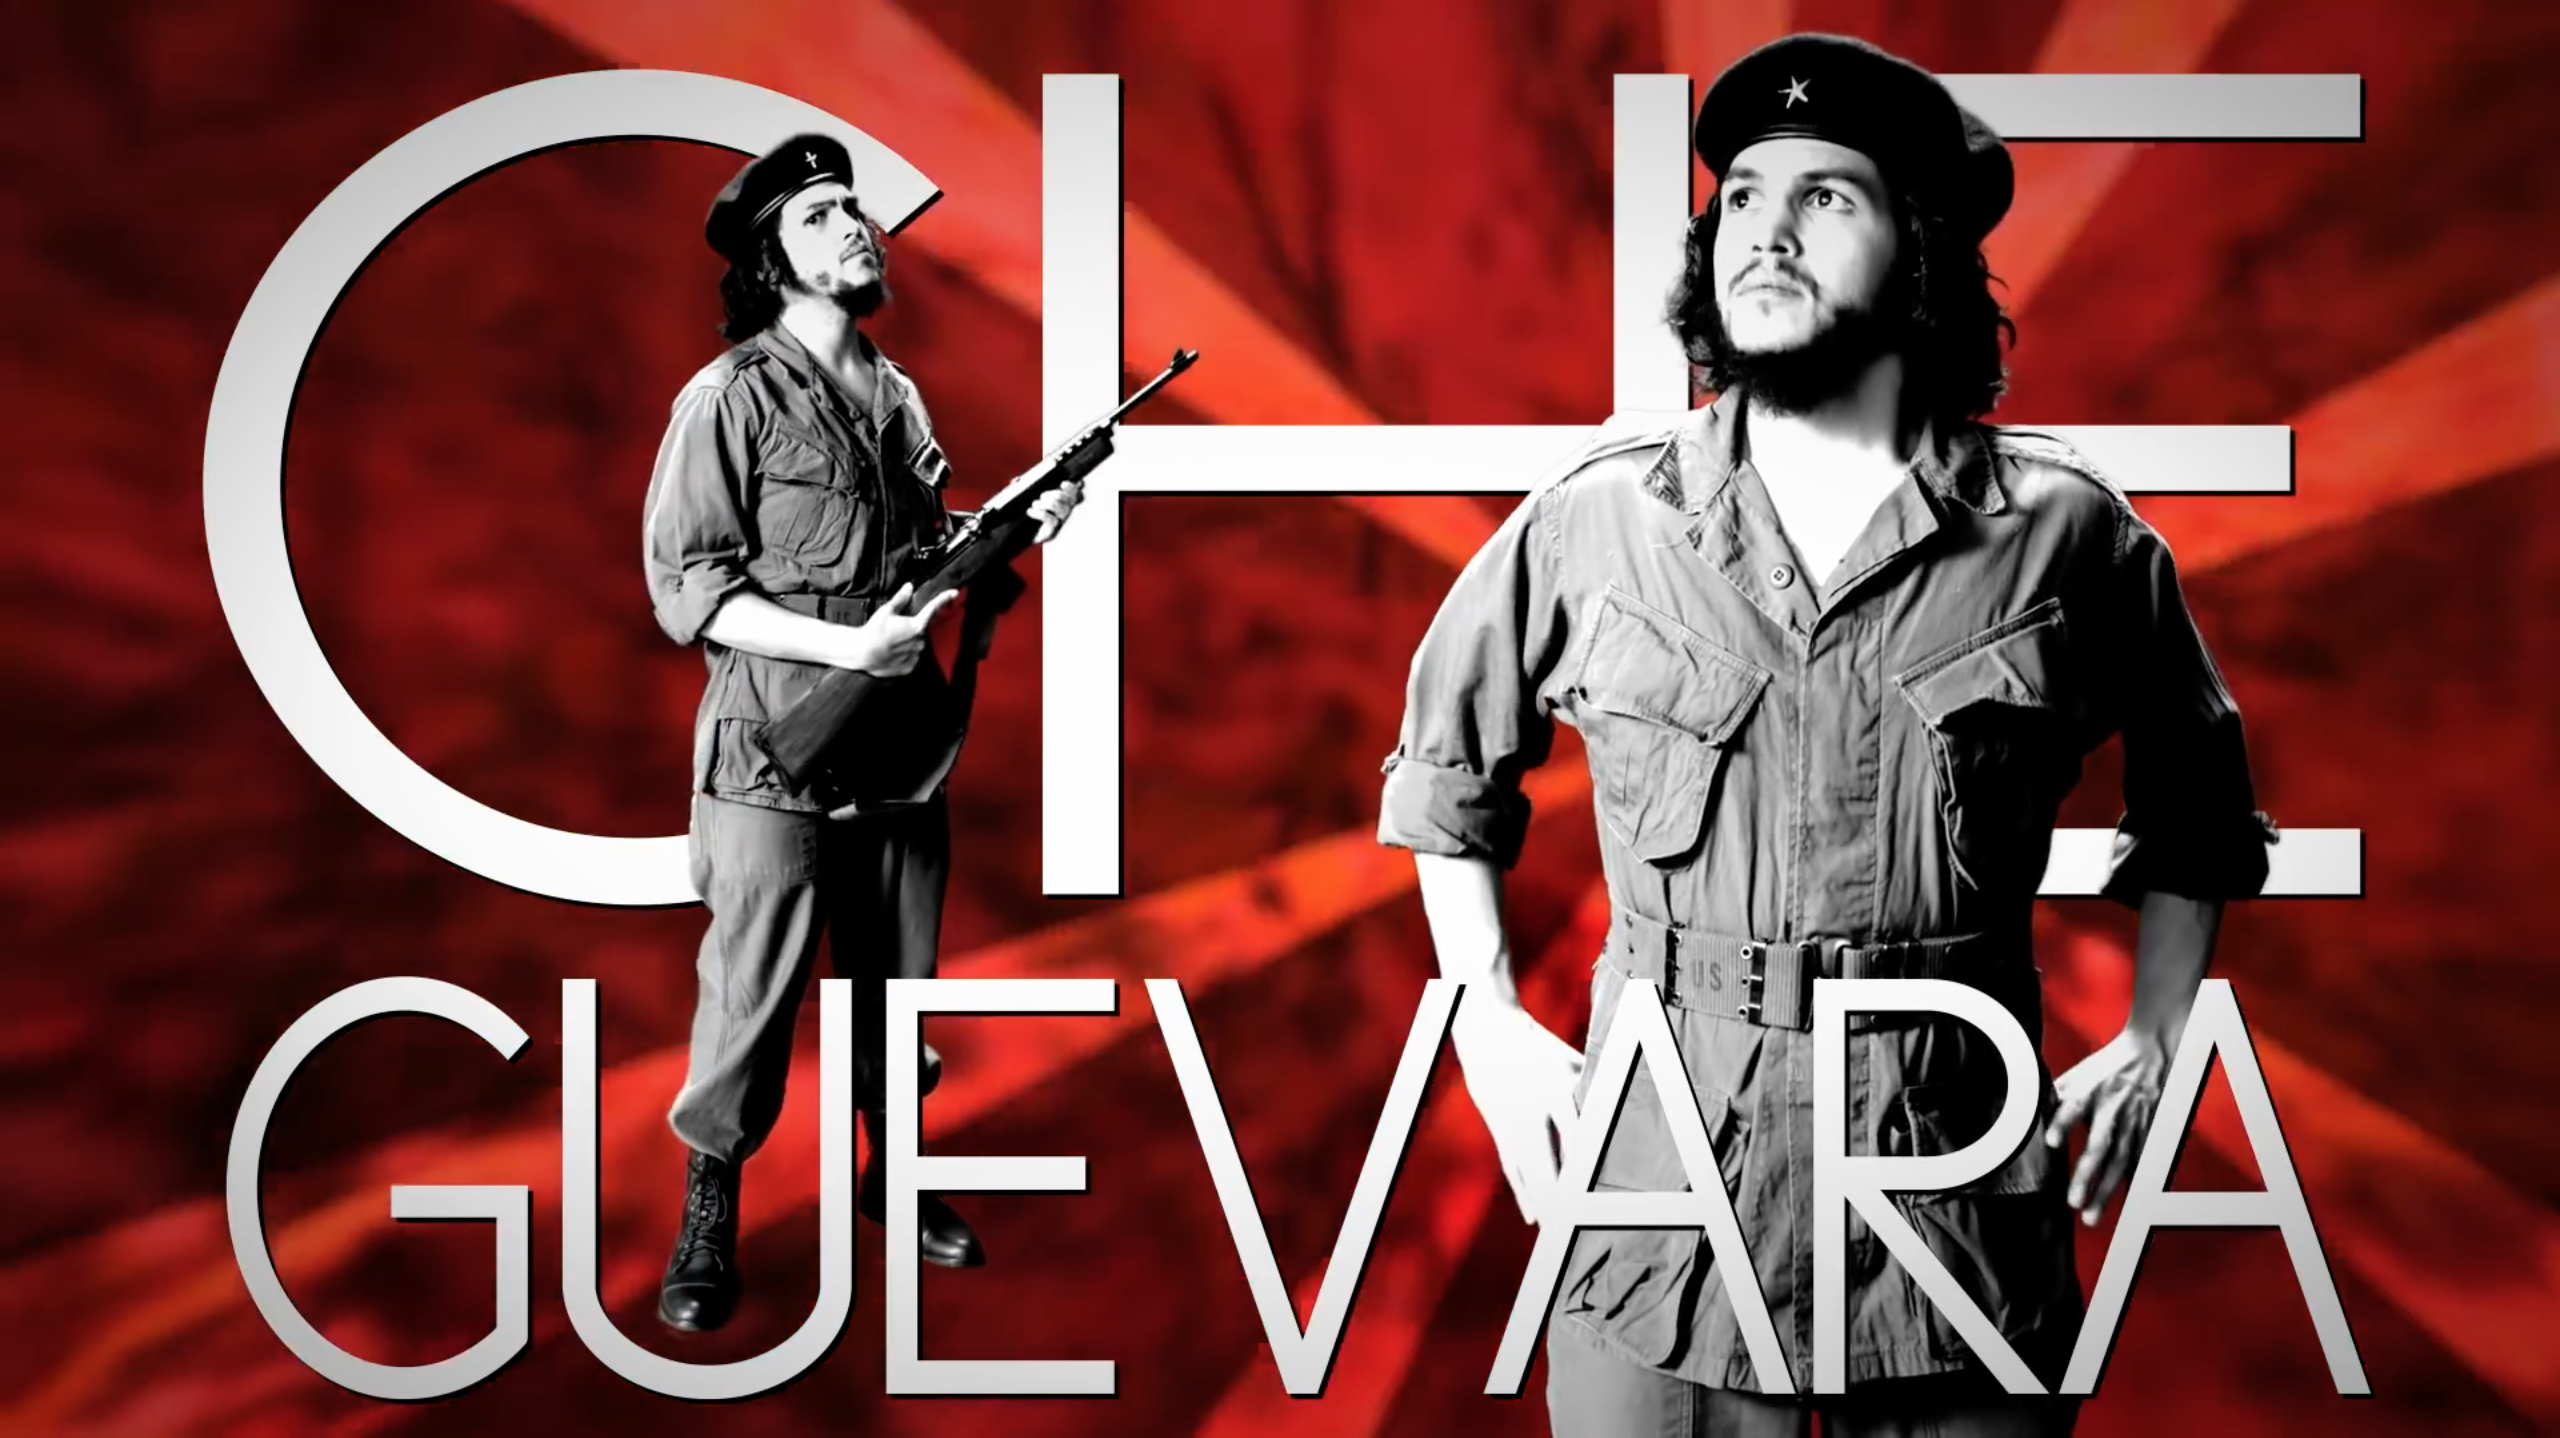 Che Guevara is dead and so is Gorbachev: Voices from the Arab